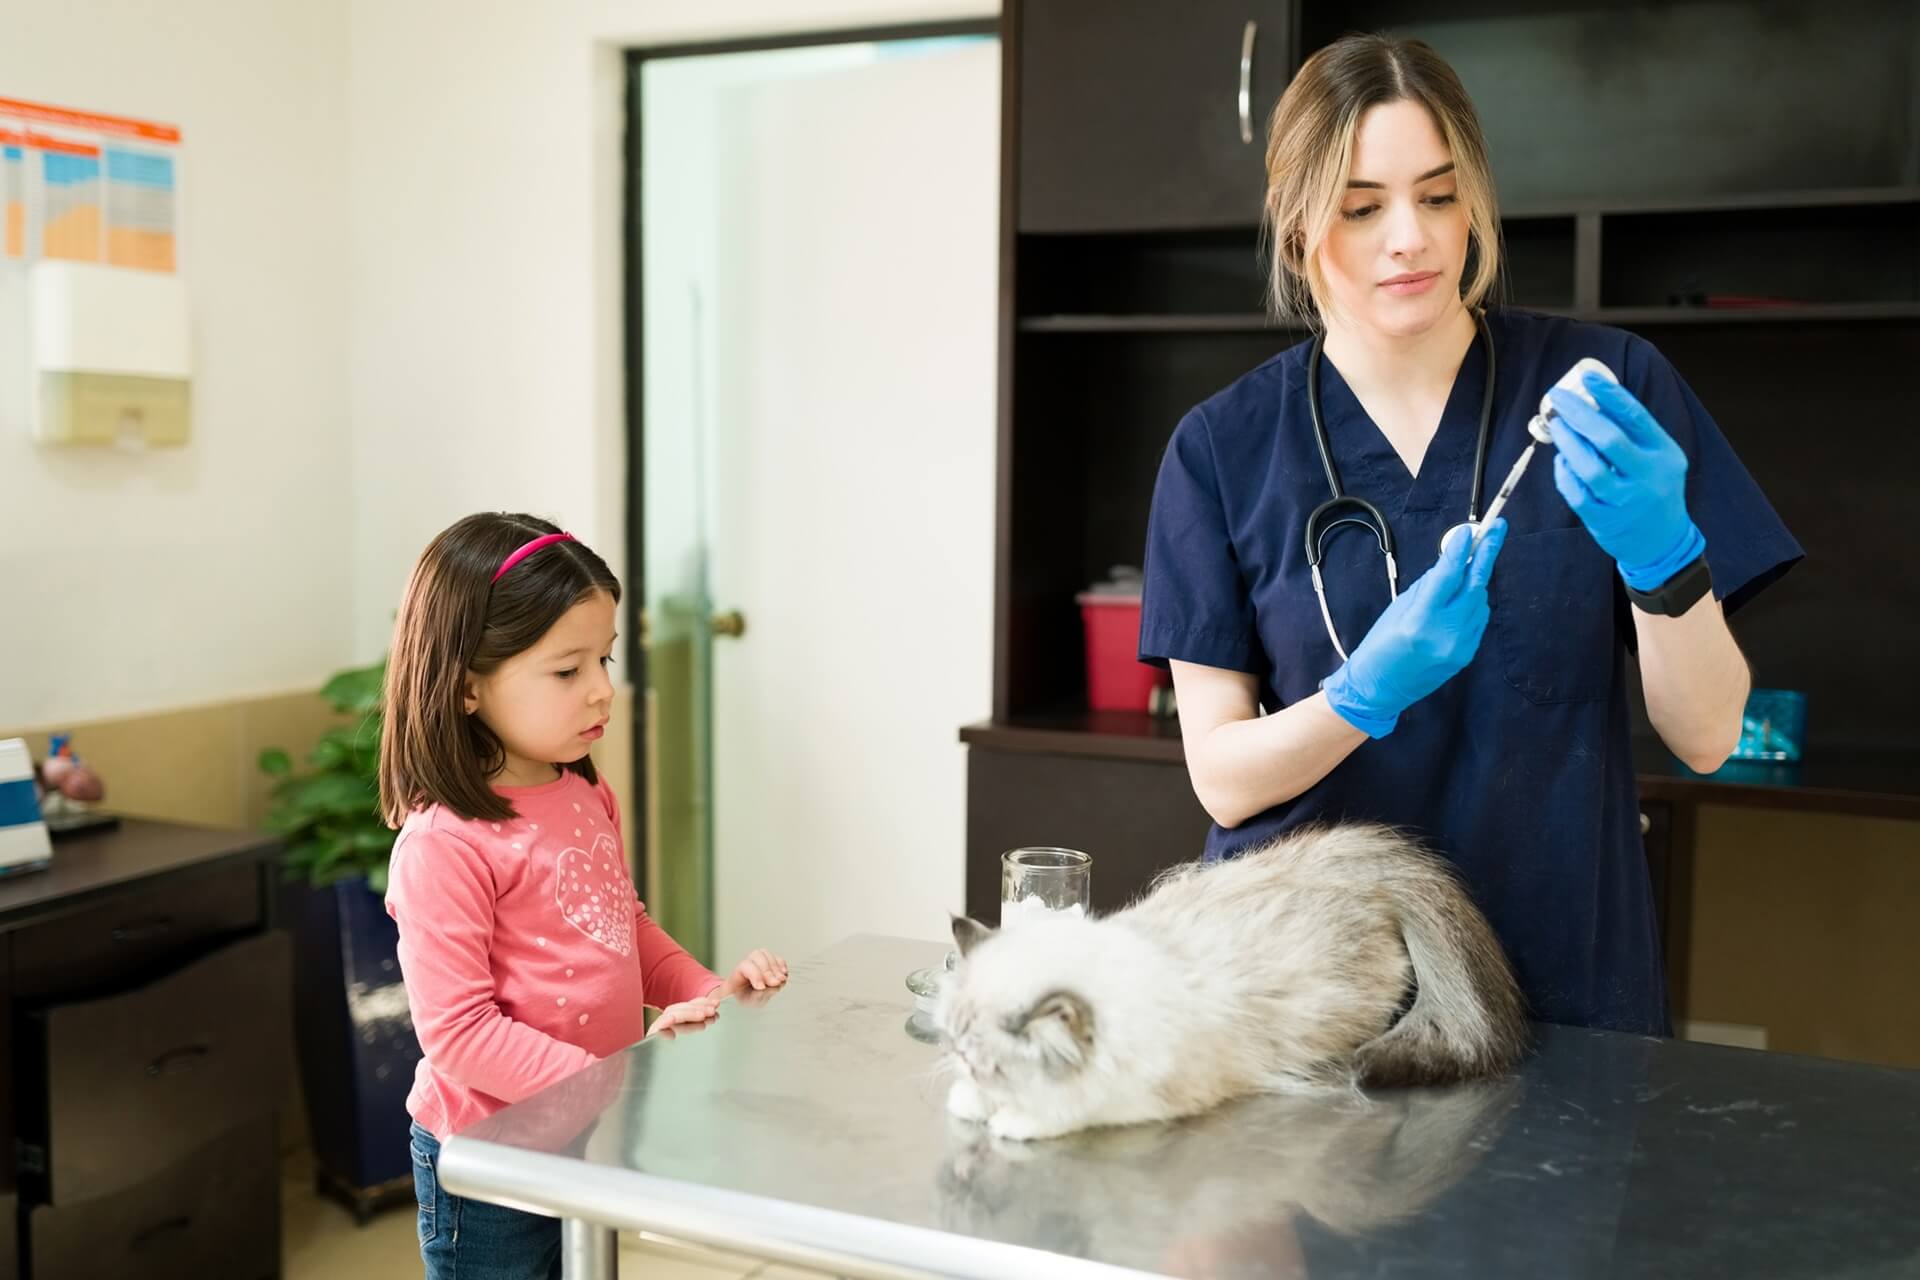 Cat sitting on exam table about to receive vaccine while child stands nearby and observes